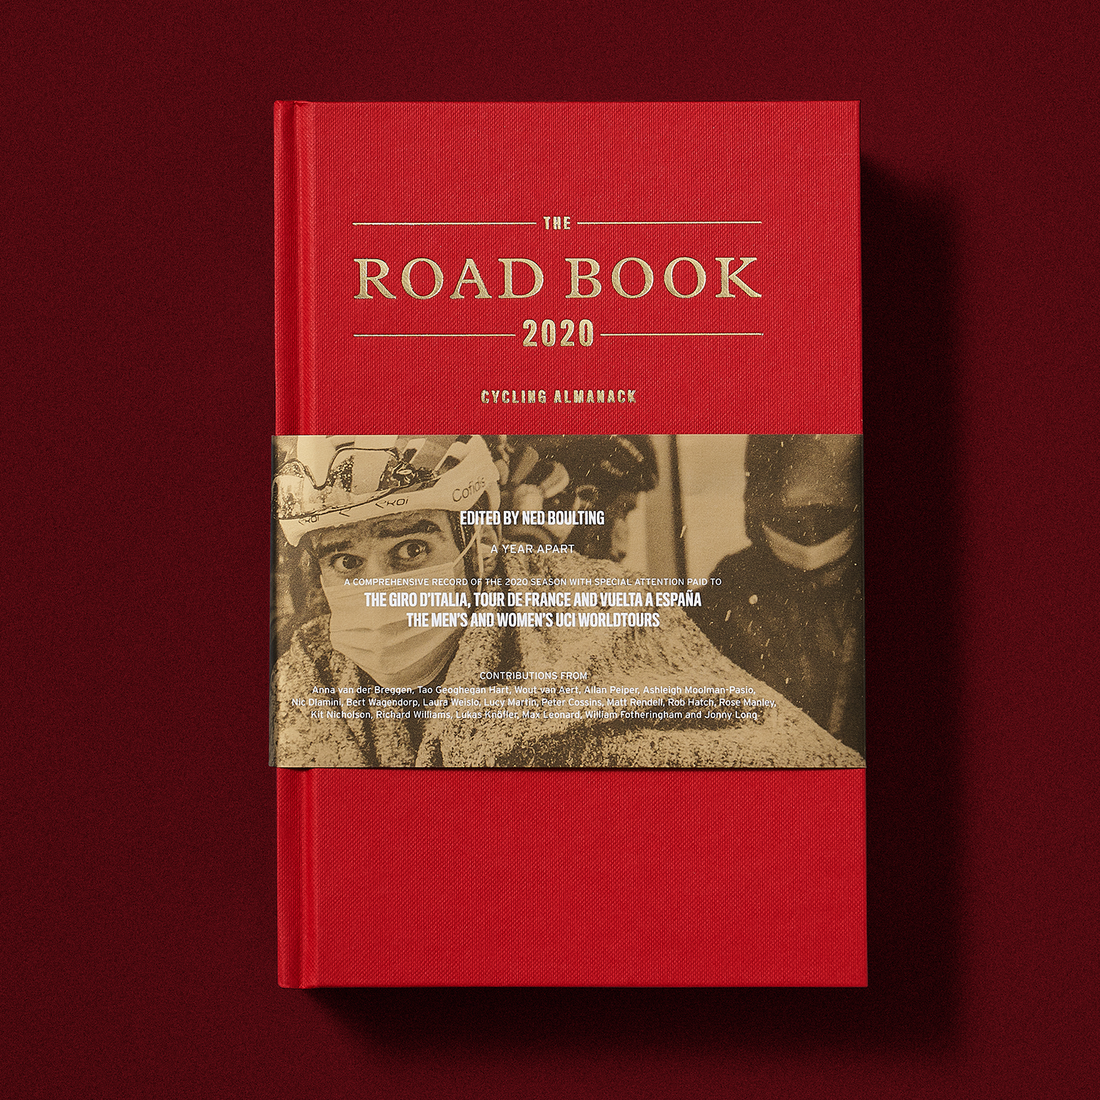 The Road Book 2020